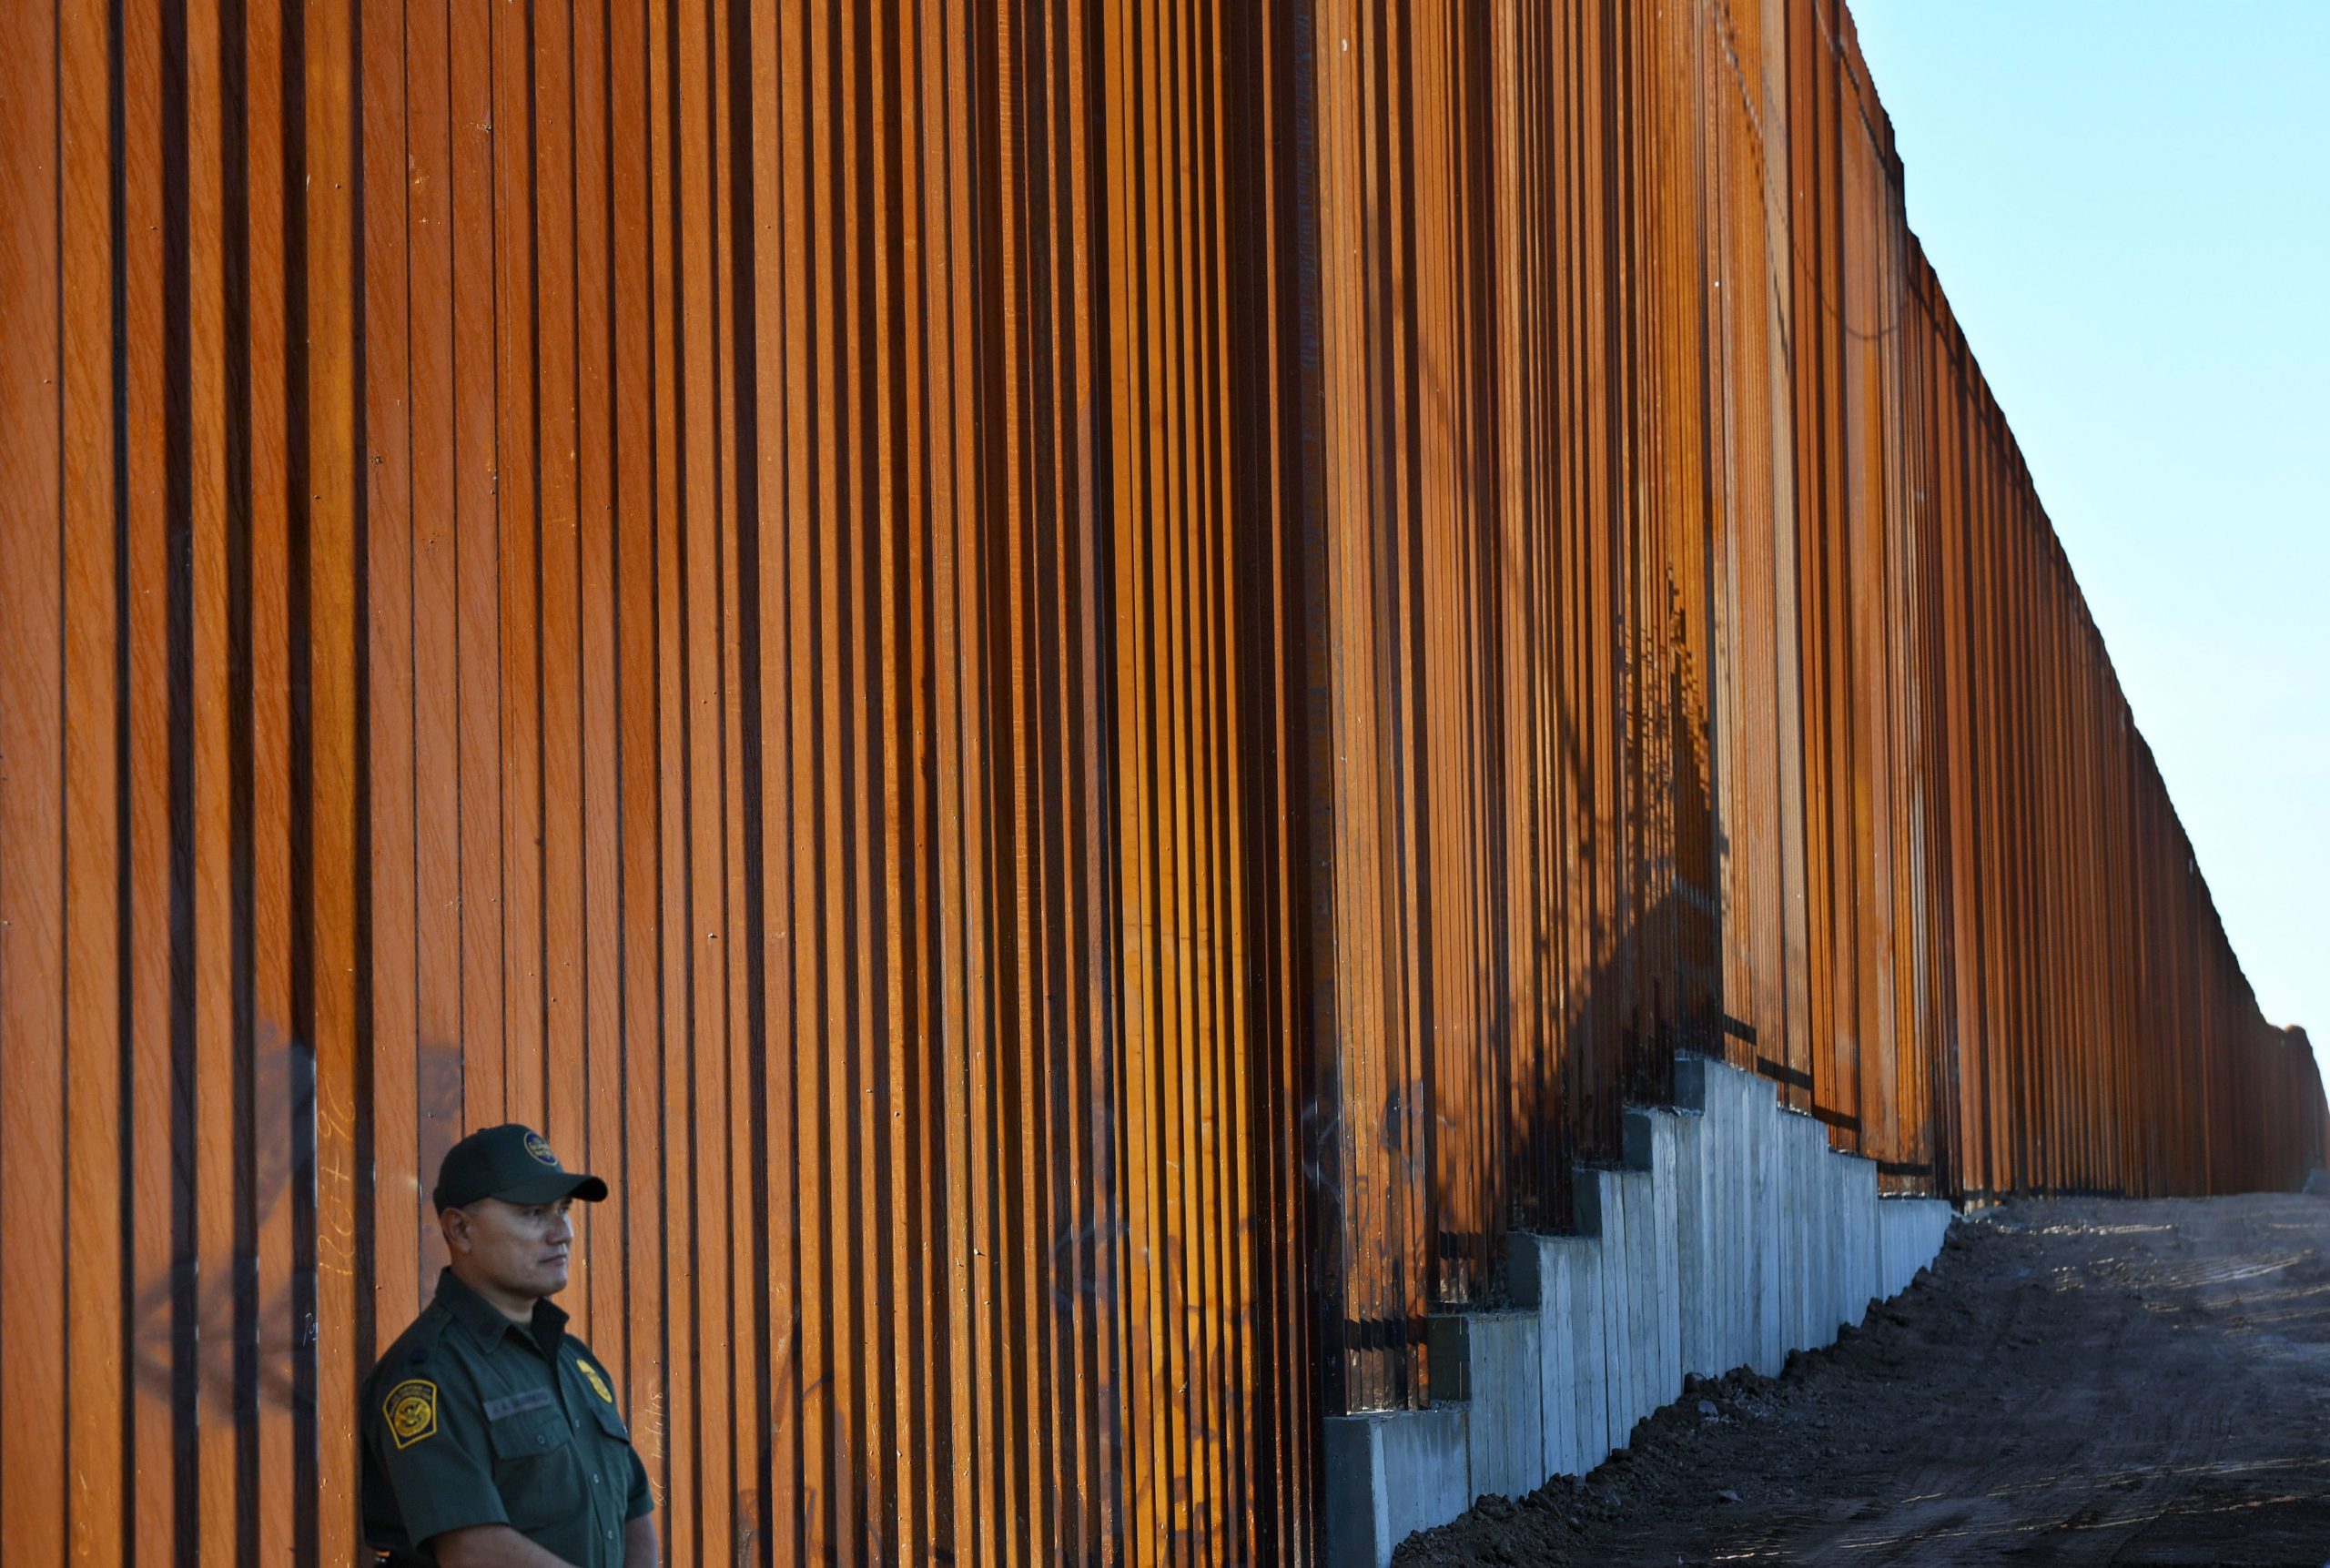 TOPSHOT - Border Patrol officers keep warch before U.S. Department of Homeland Security Secretary Kirstjen M. Nielsen inaugurates the first completed section of President Trumps 30-foot border wall in the El Centro Sector, at the US Mexico border in Calexico, California on October 26, 2018. (Photo by Mark RALSTON / AFP) (Photo credit should read MARK RALSTON/AFP via Getty Images)